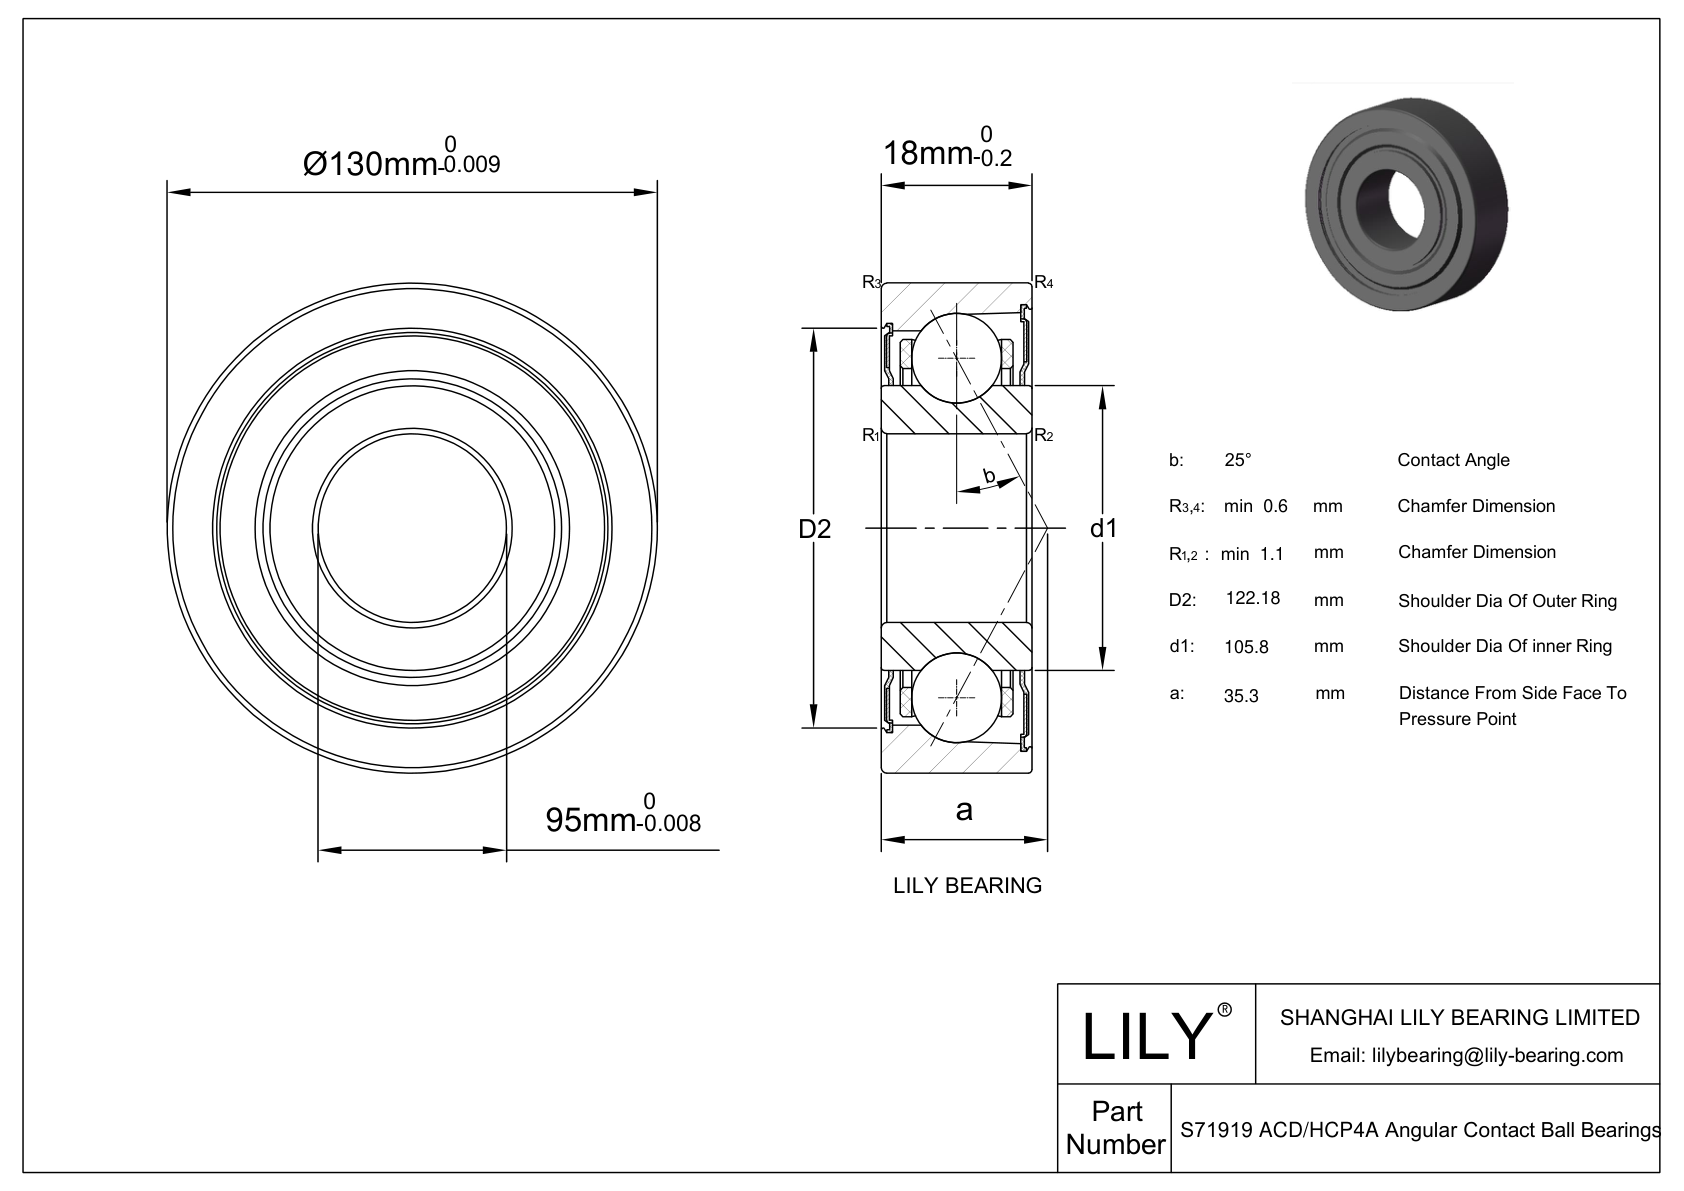 S71919 ACD/HCP4A Super Precision Angular Contact Ball Bearings cad drawing